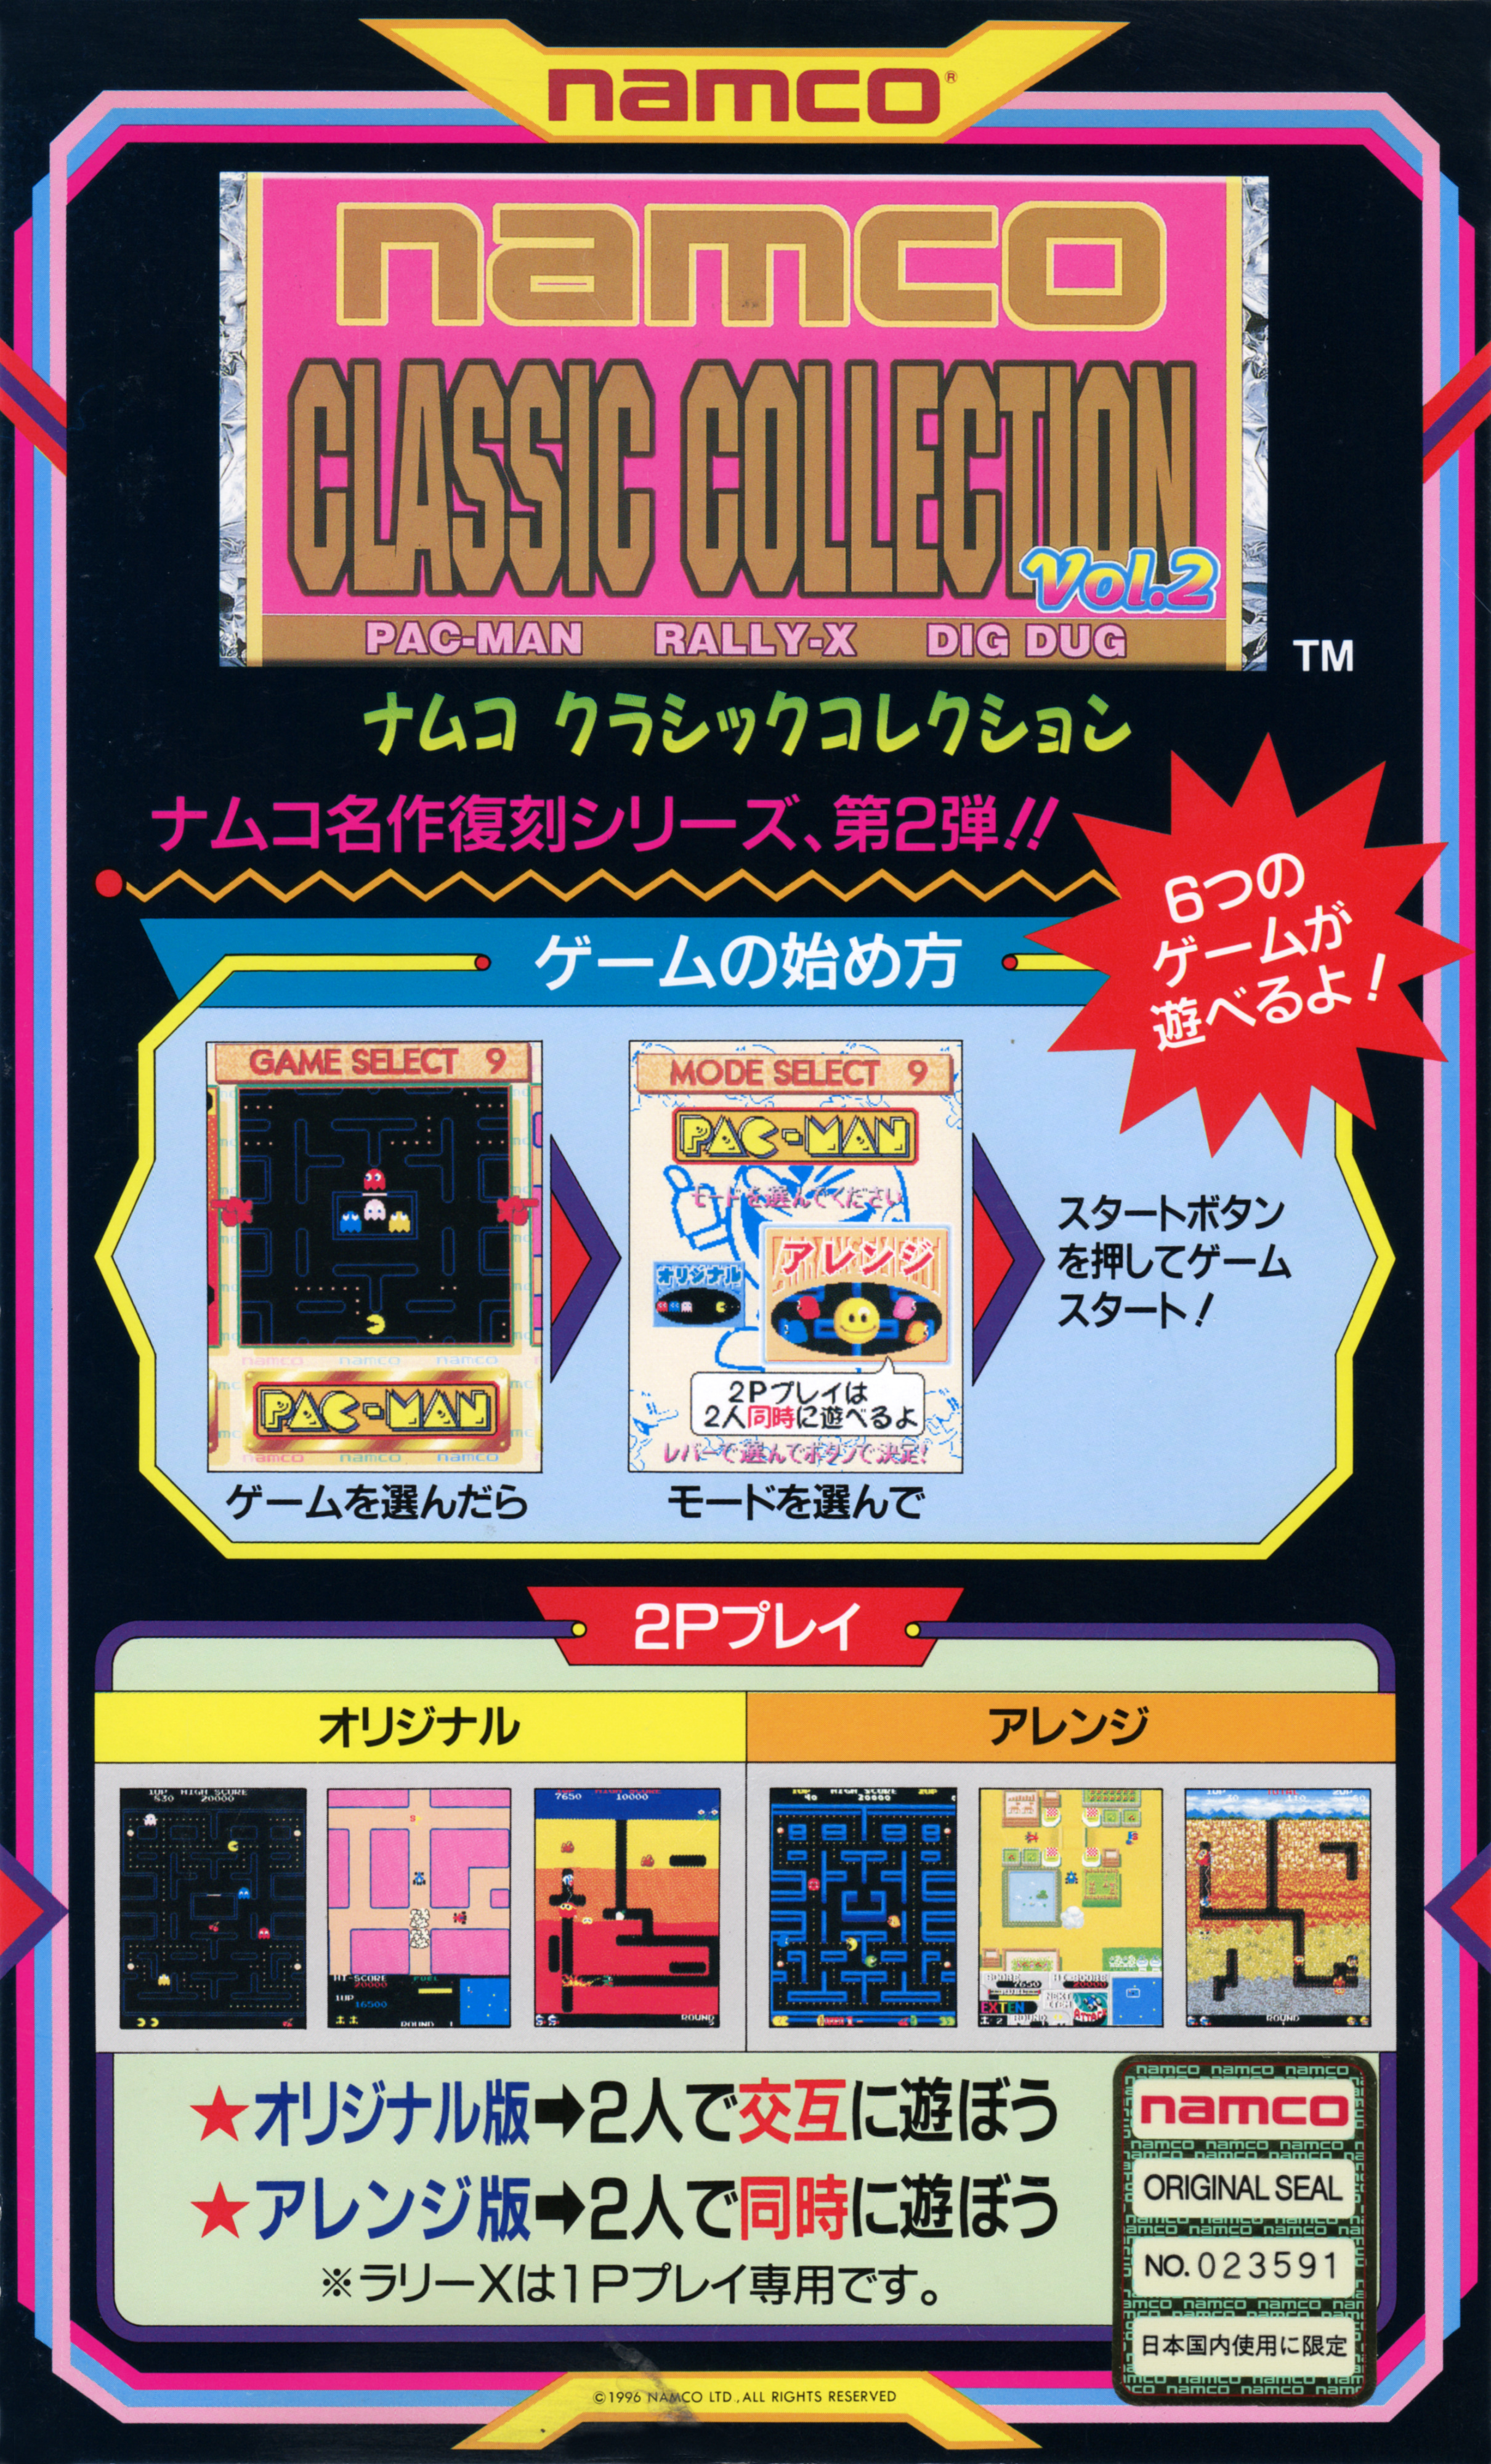 Namco Classic Collection Vol 2 Details Launchbox Games